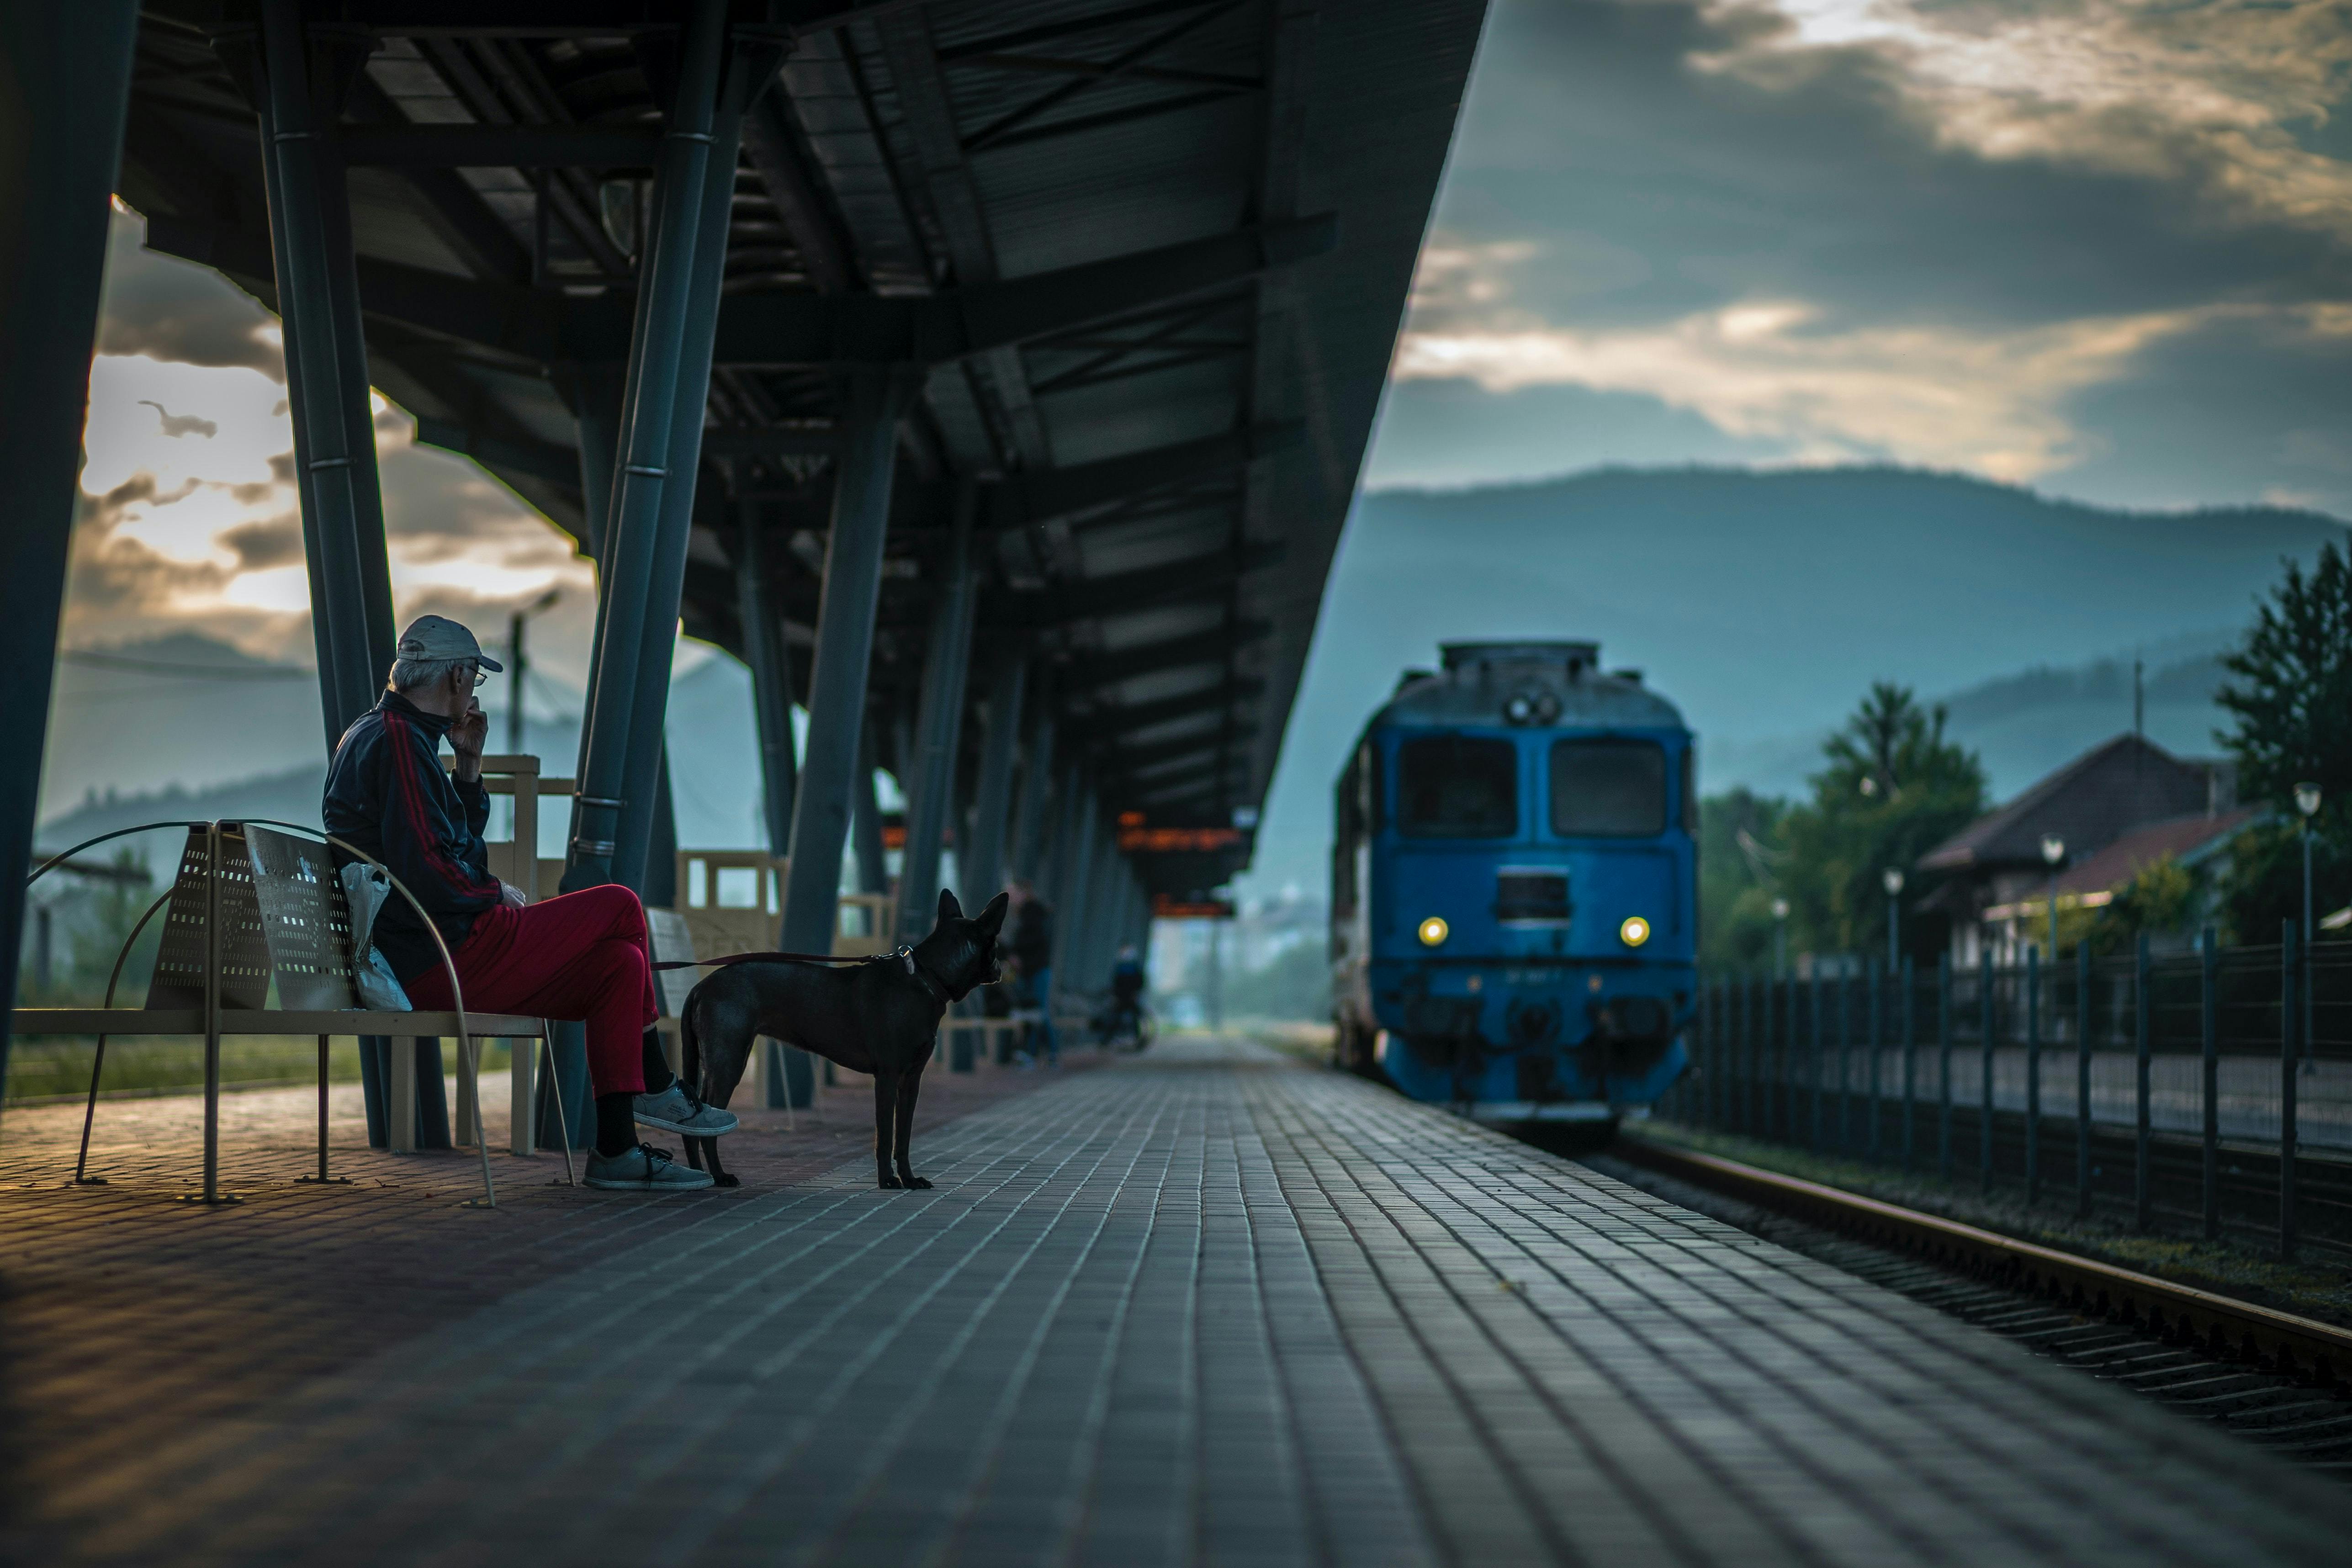 wellness-how-to-travel-with-your-dog-on-the-train-hero-image